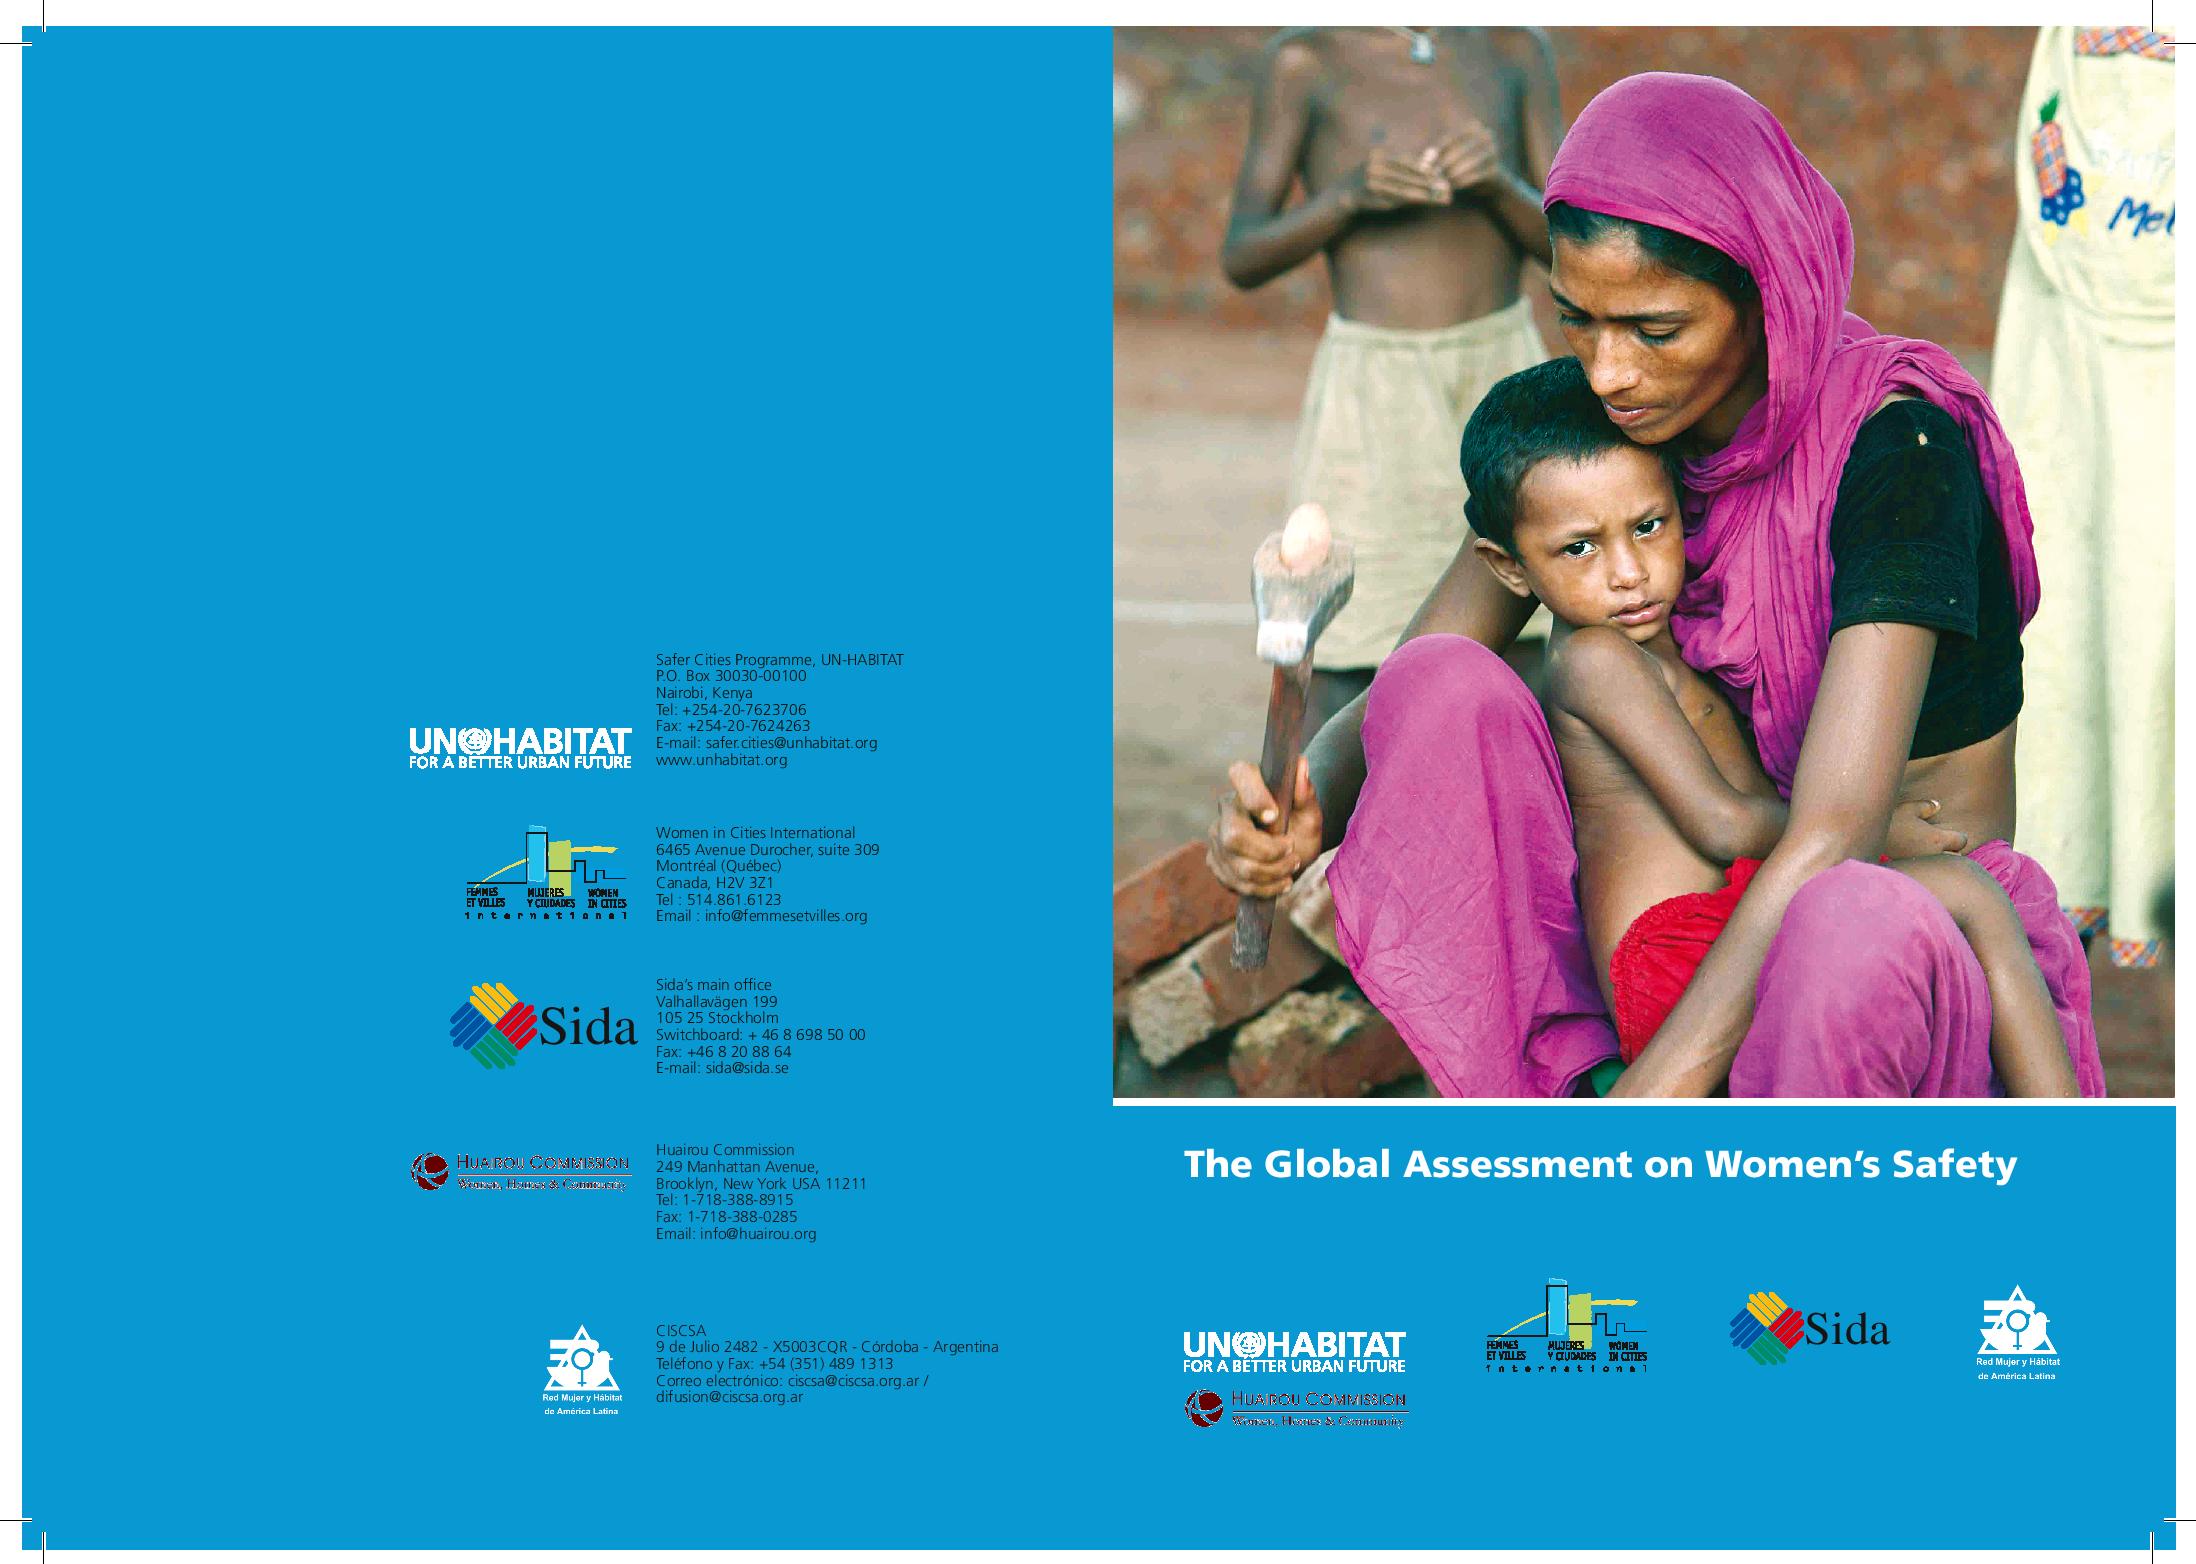 The Global Assessment on Women’s Safety